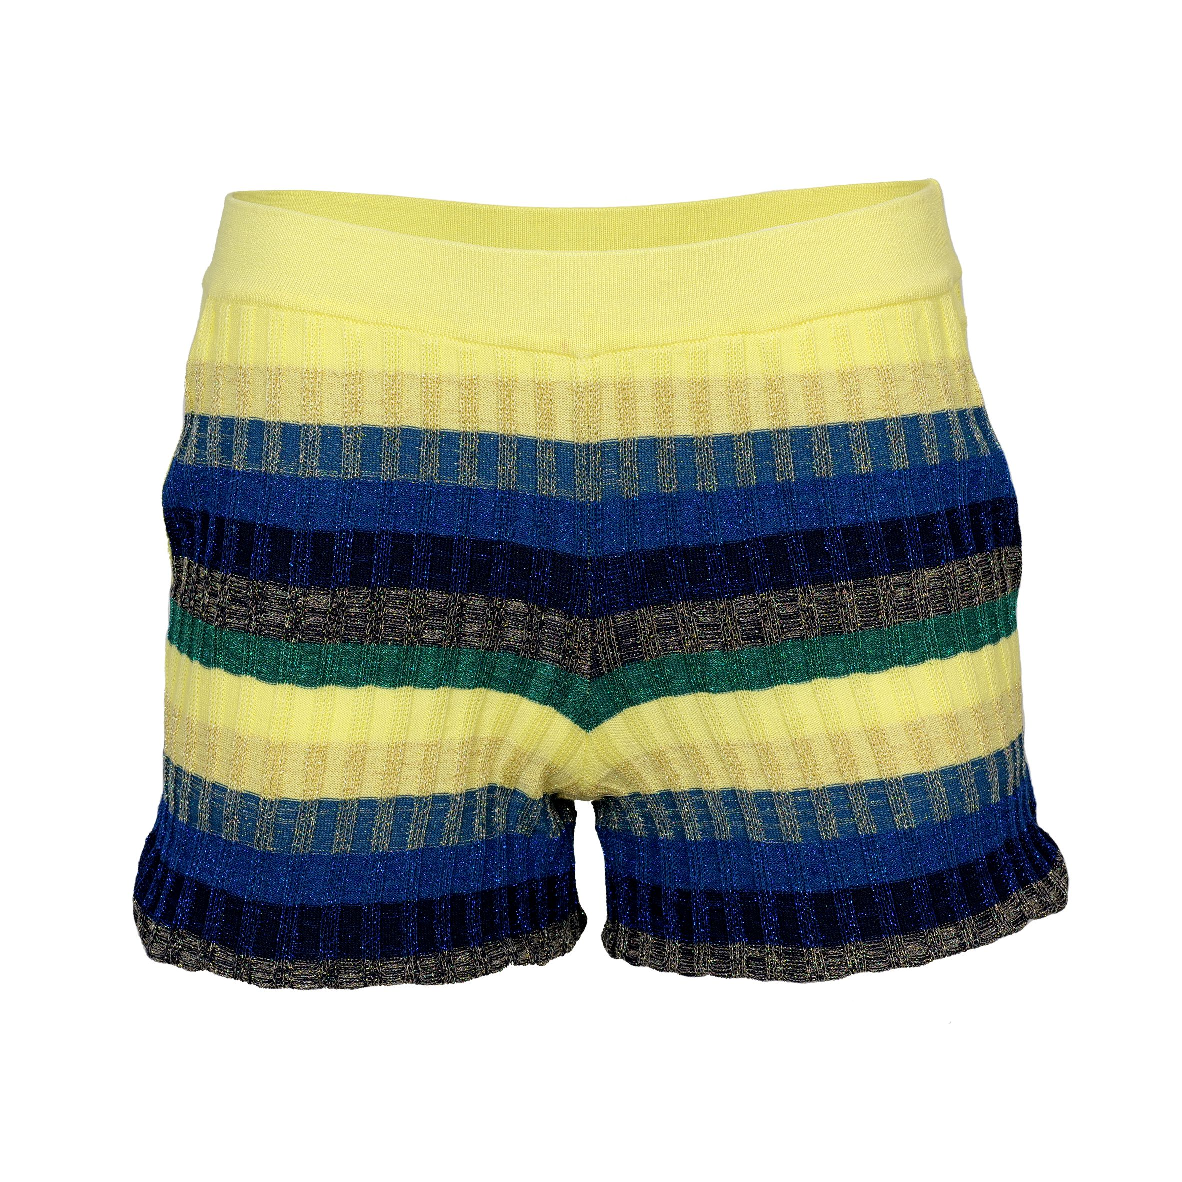 Striped Shorts: Tuck Stitch Knit, Lined with Pockets in Dual Tone